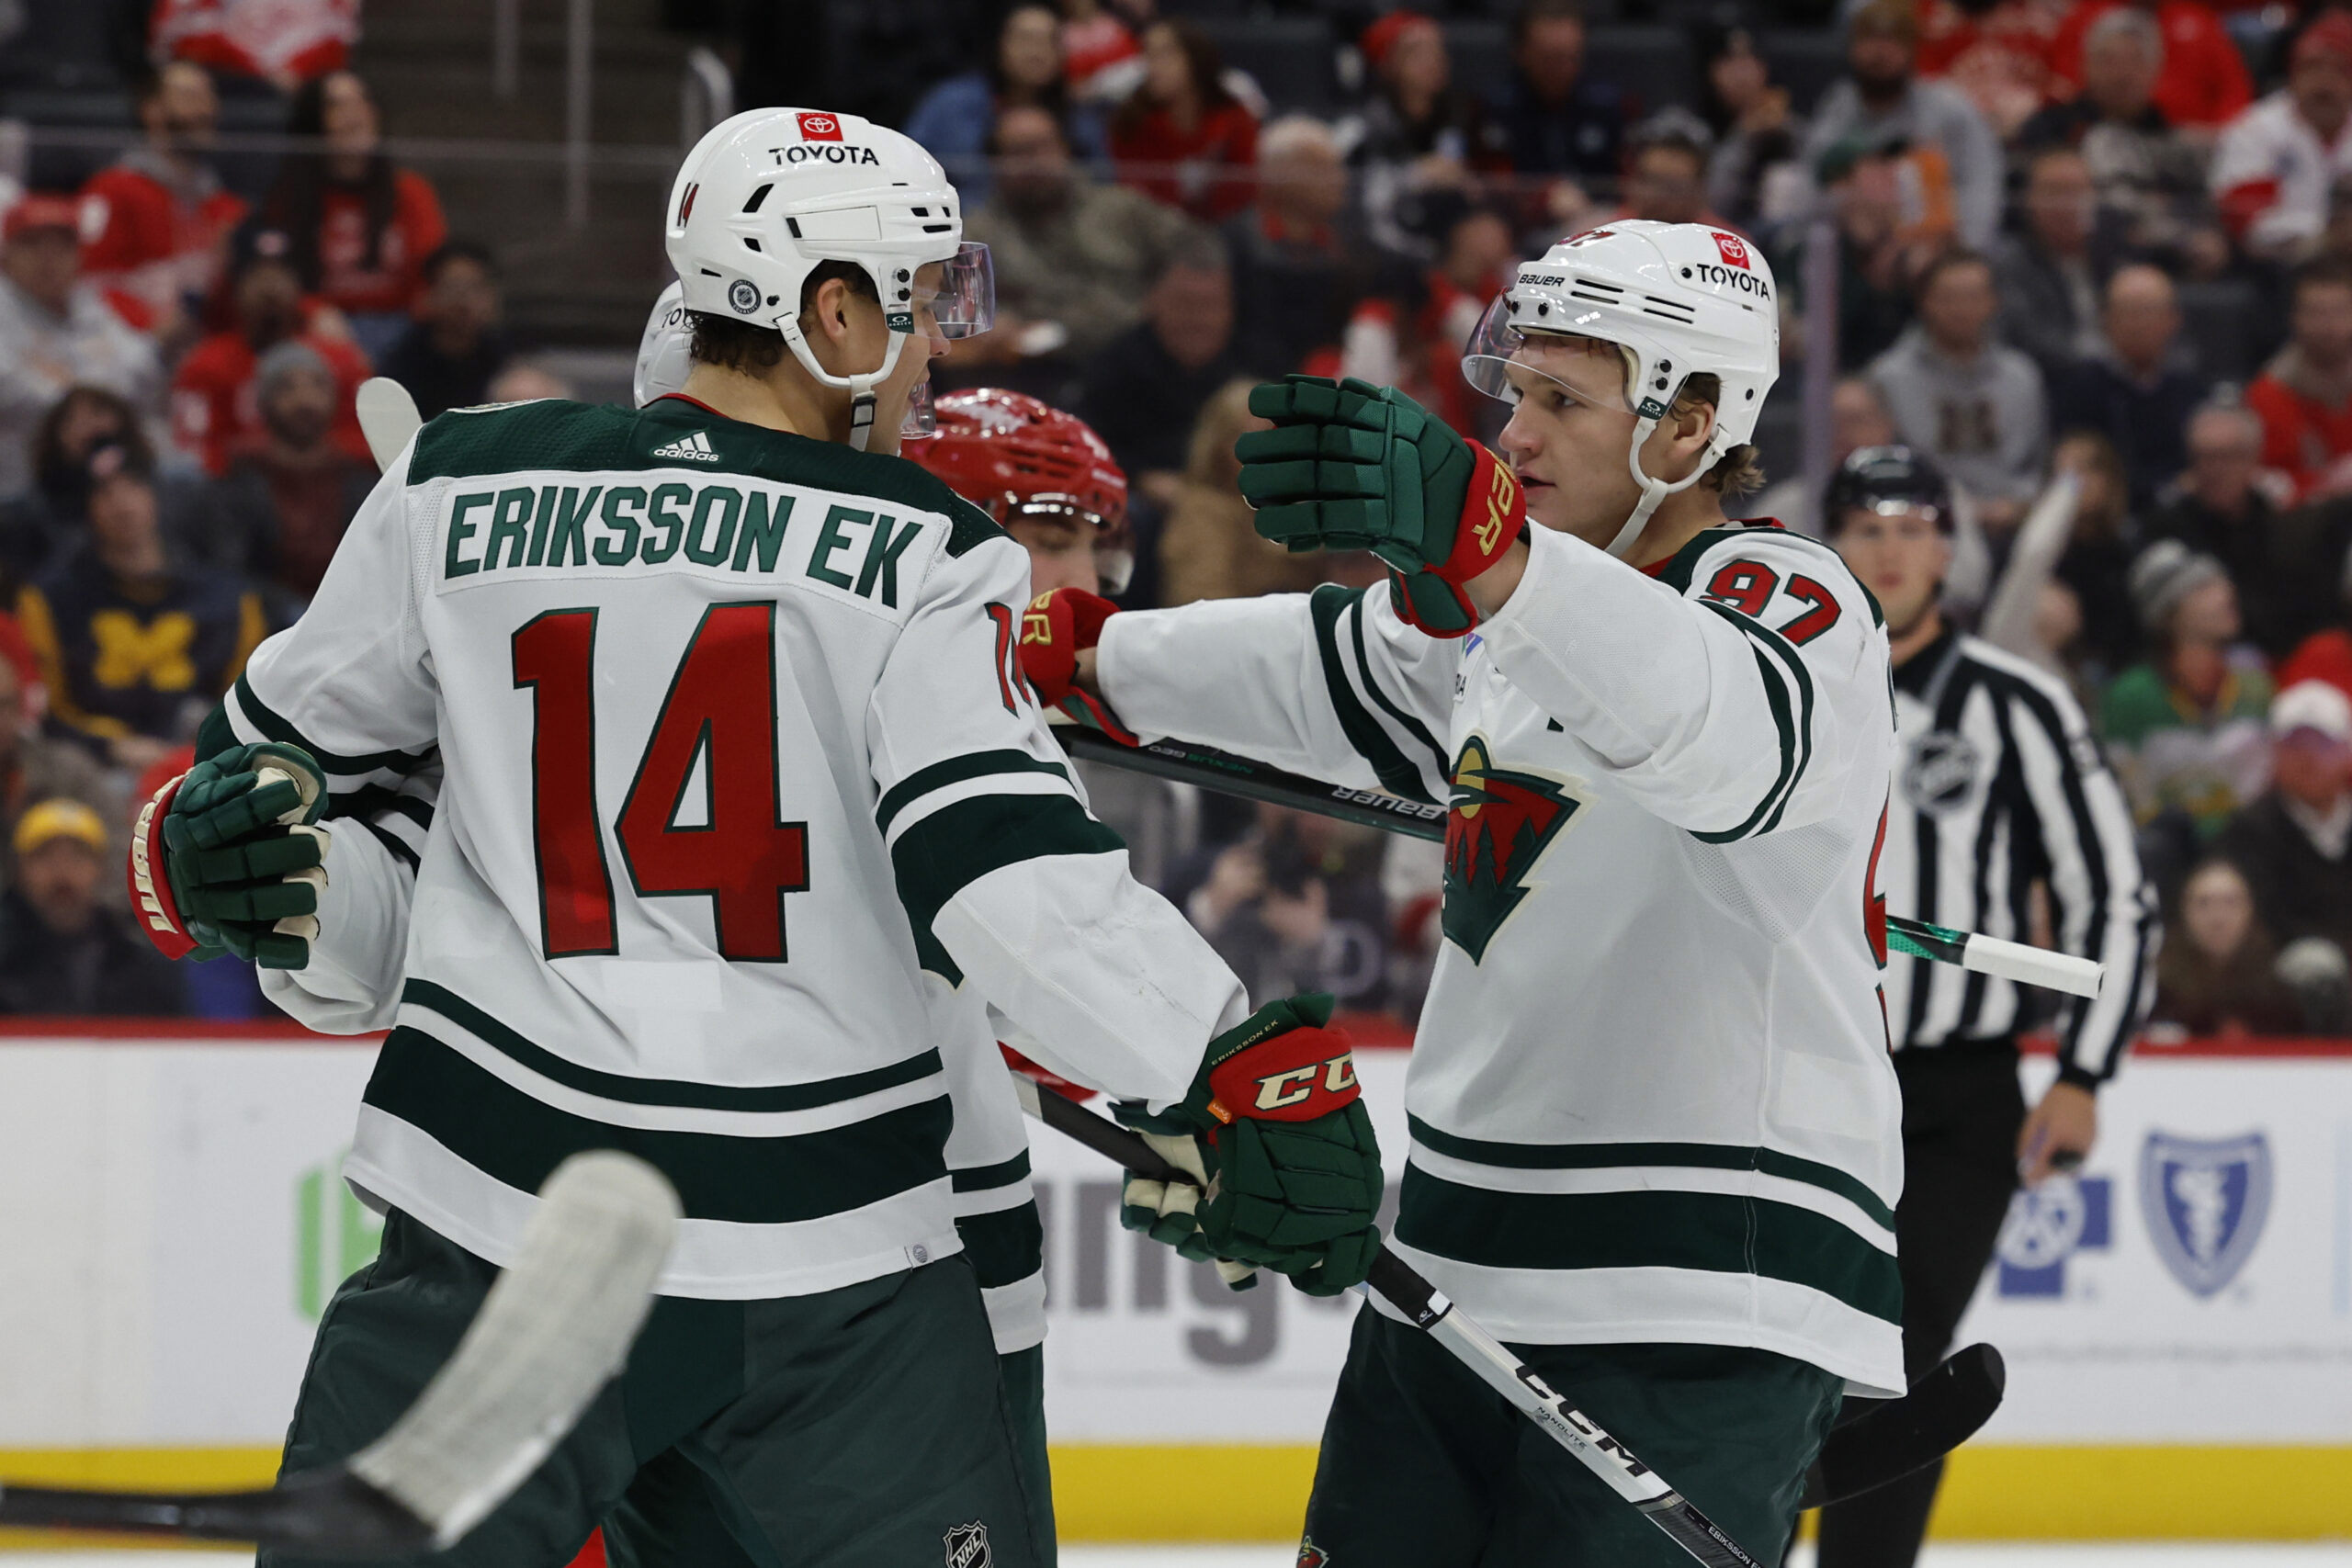 Minnesota Wild game today; TV Schedule, Channel and more